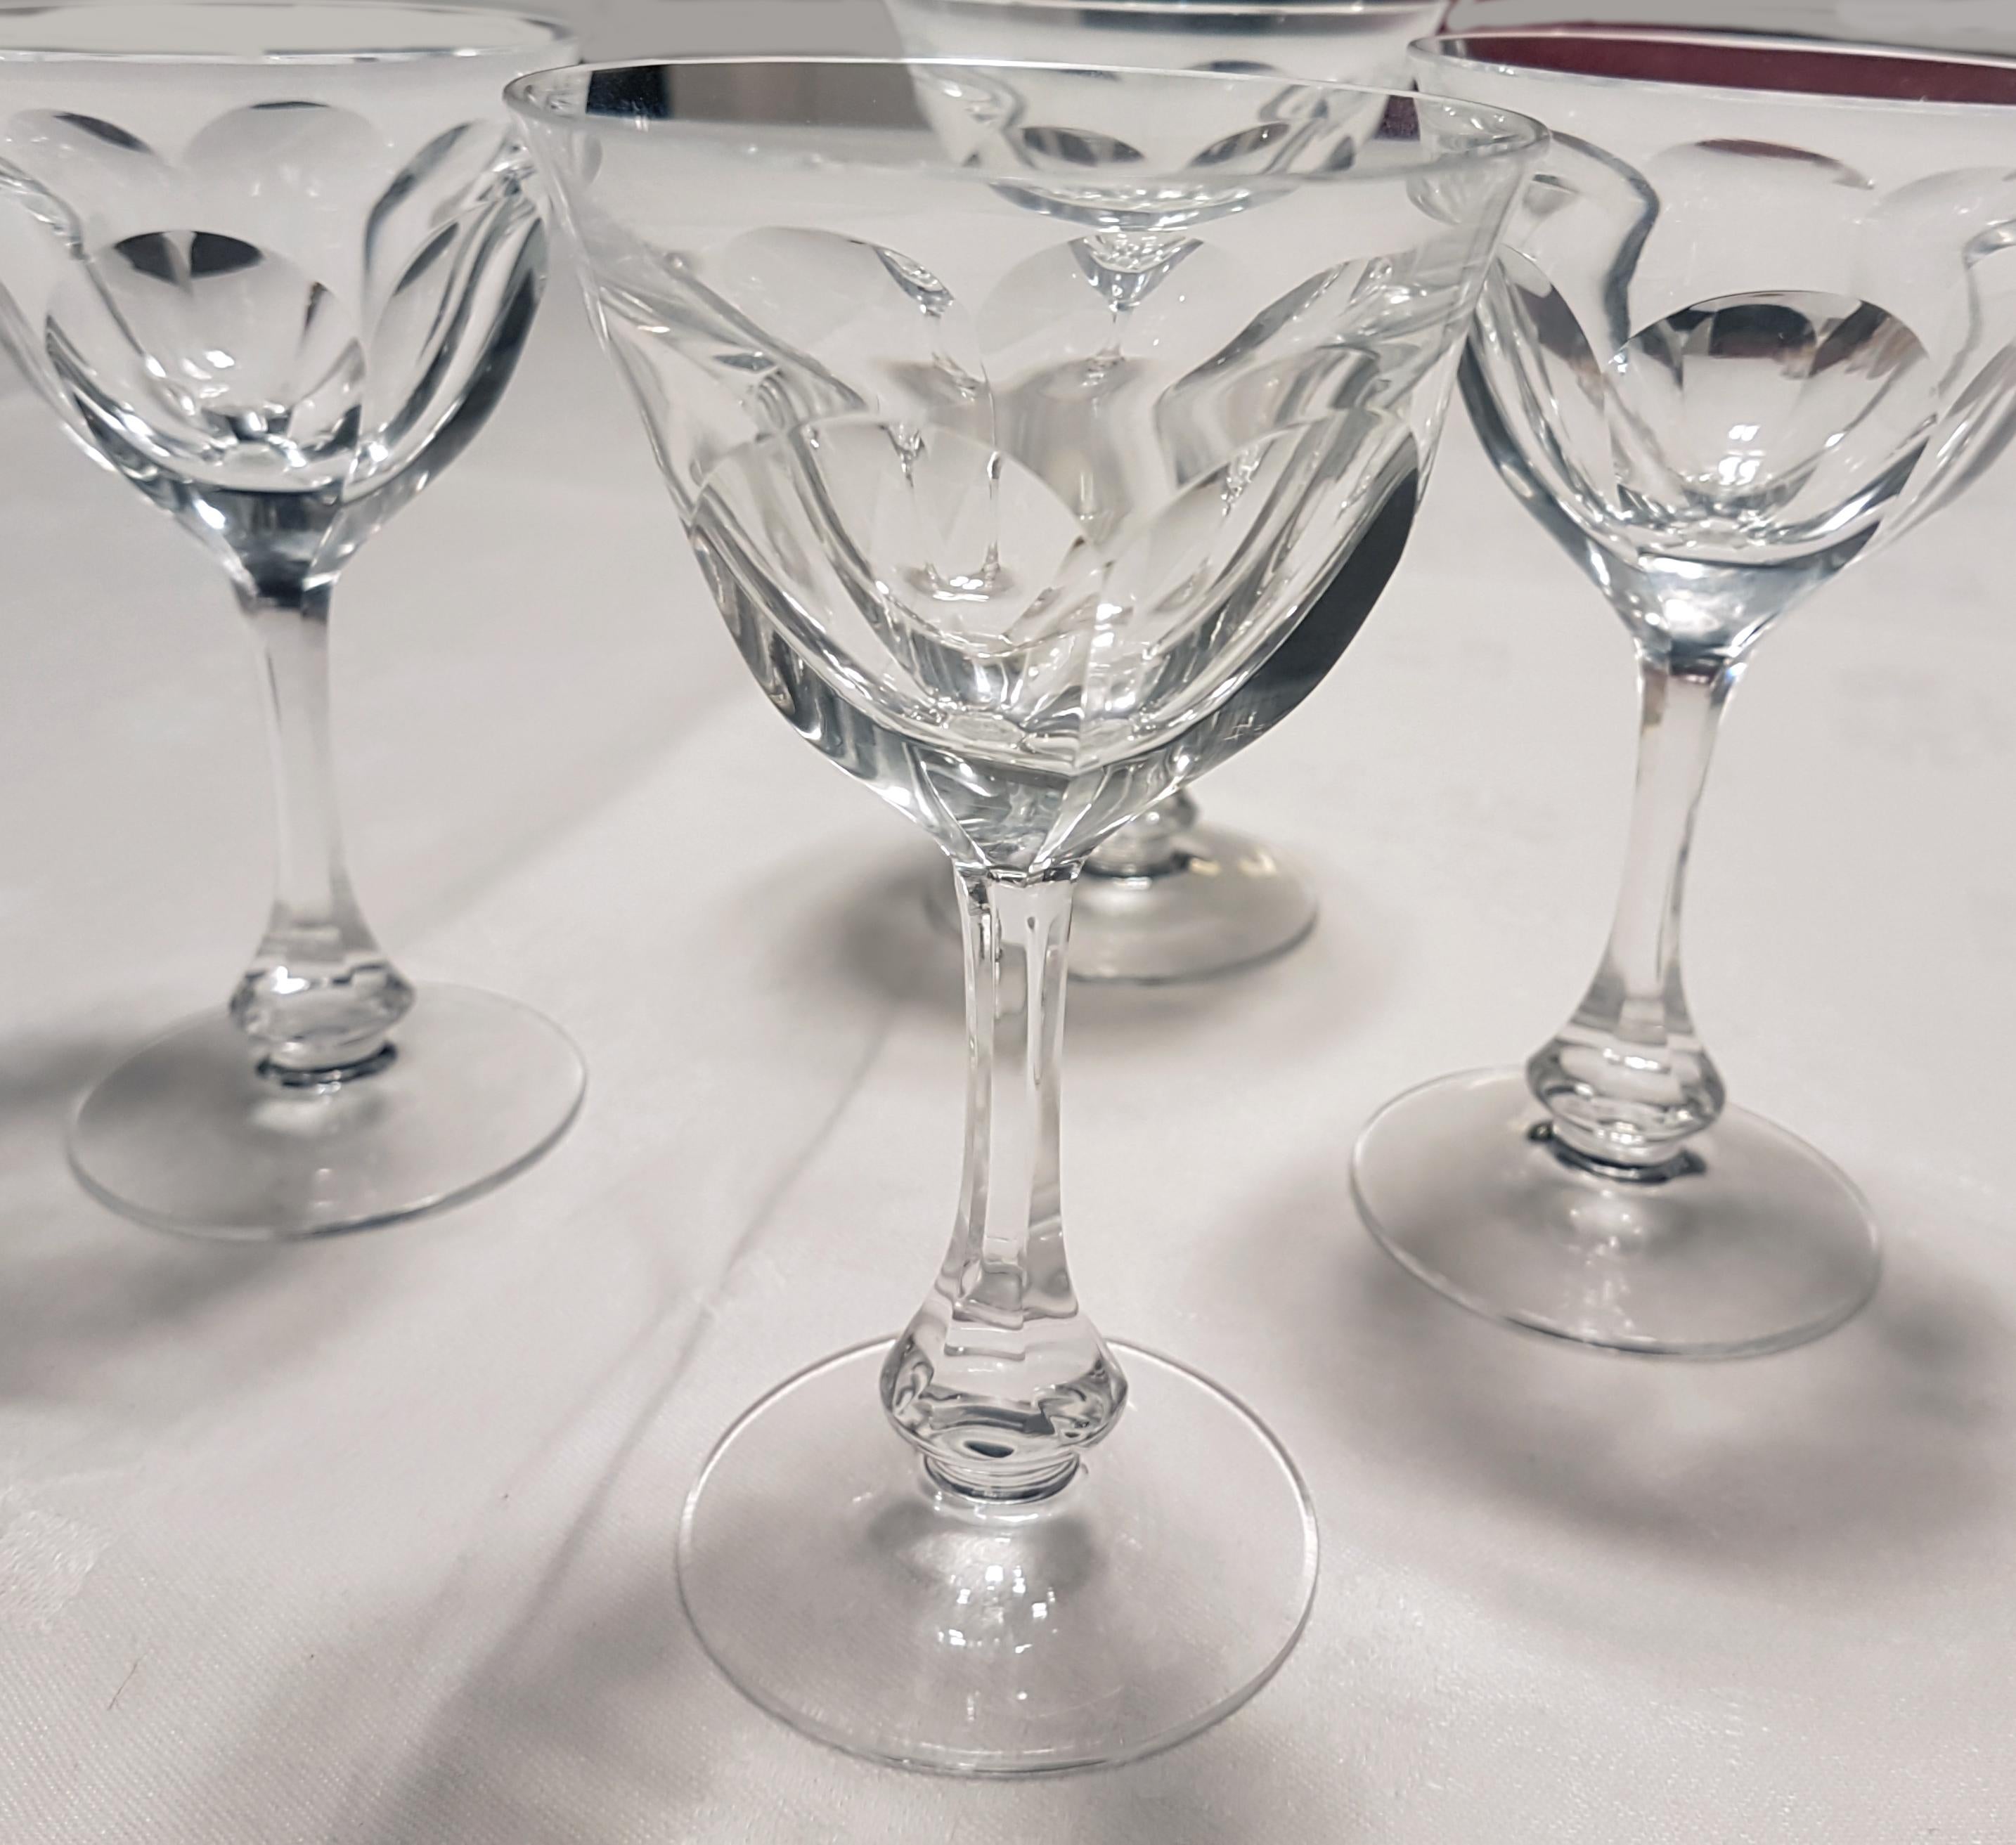 These are 4 liquor glasses or small wine glasses made from hand blown crystal by Moser in the ever popular Lady Hamilton glass cut.

This pattern is an example of the 